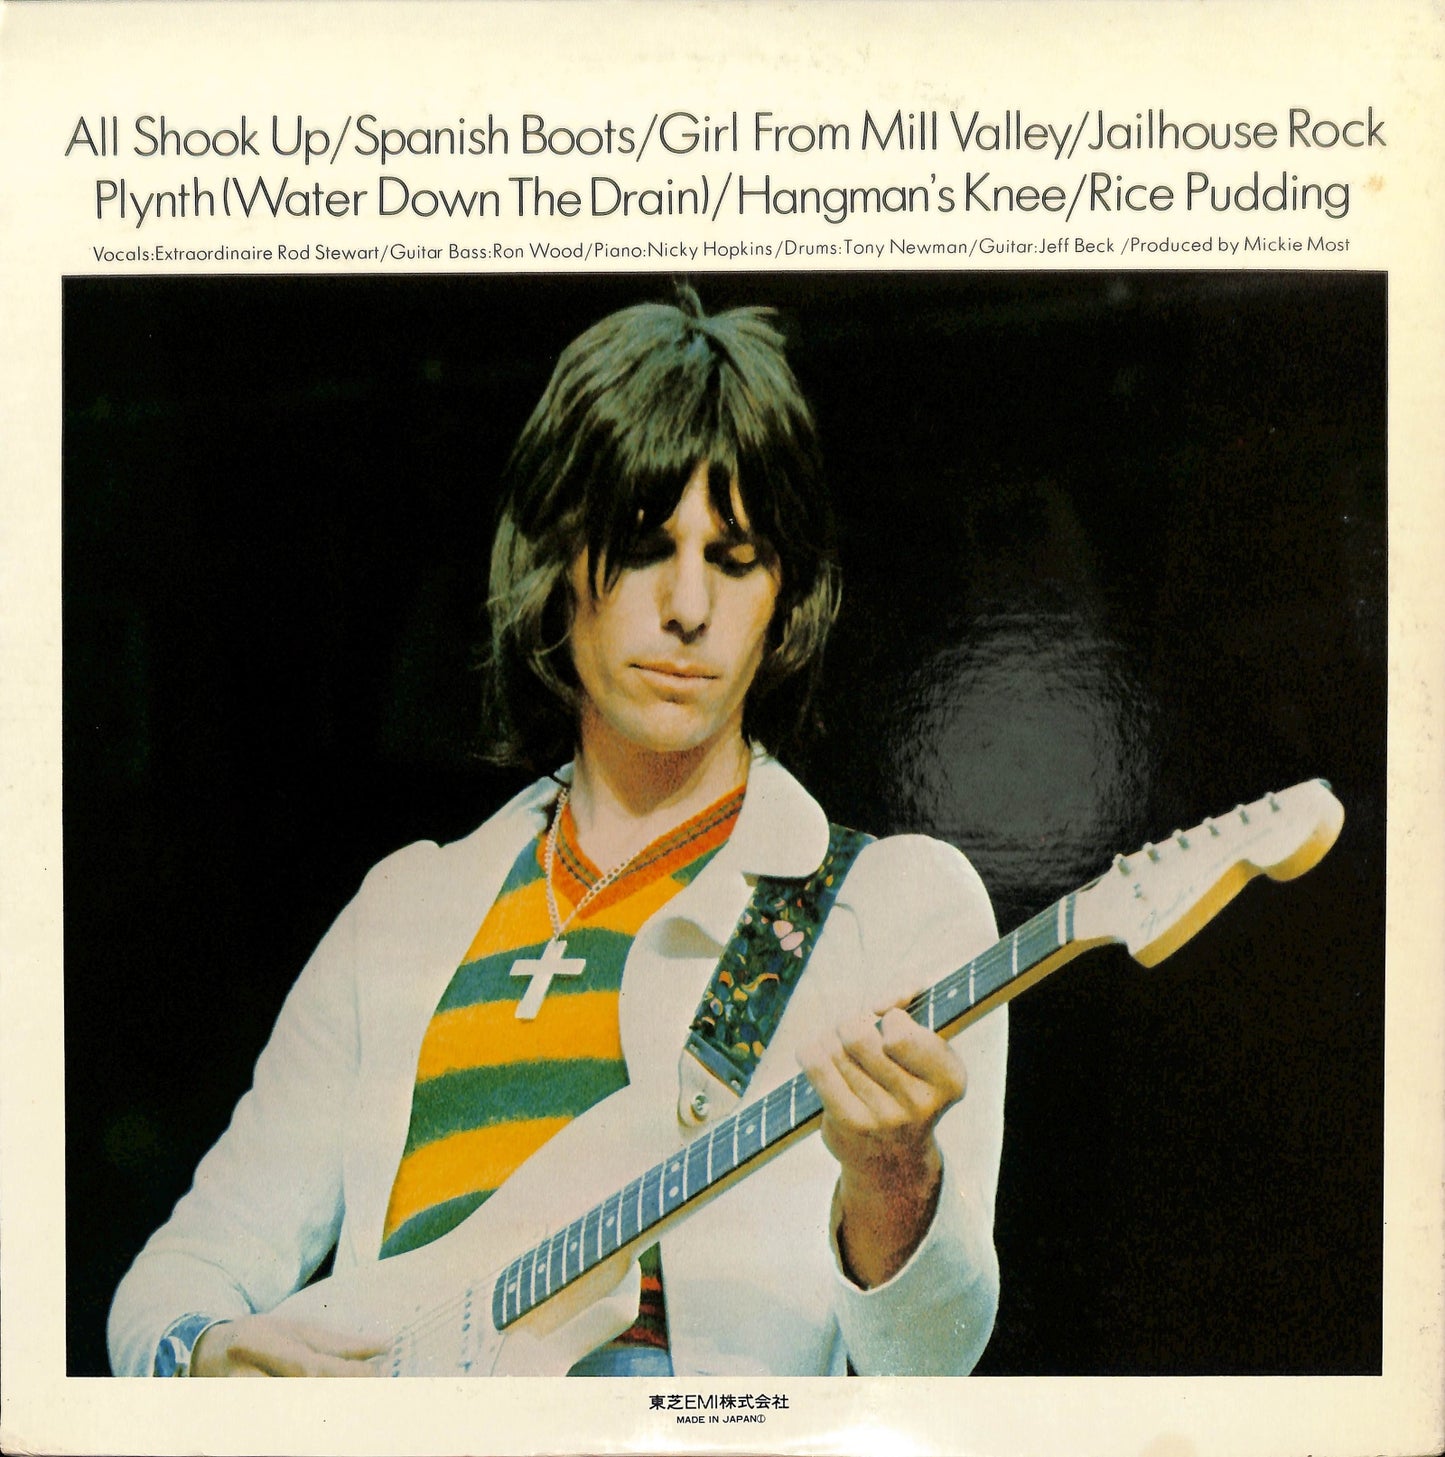 THE JEFF BECK GROUP - Beck-Ola